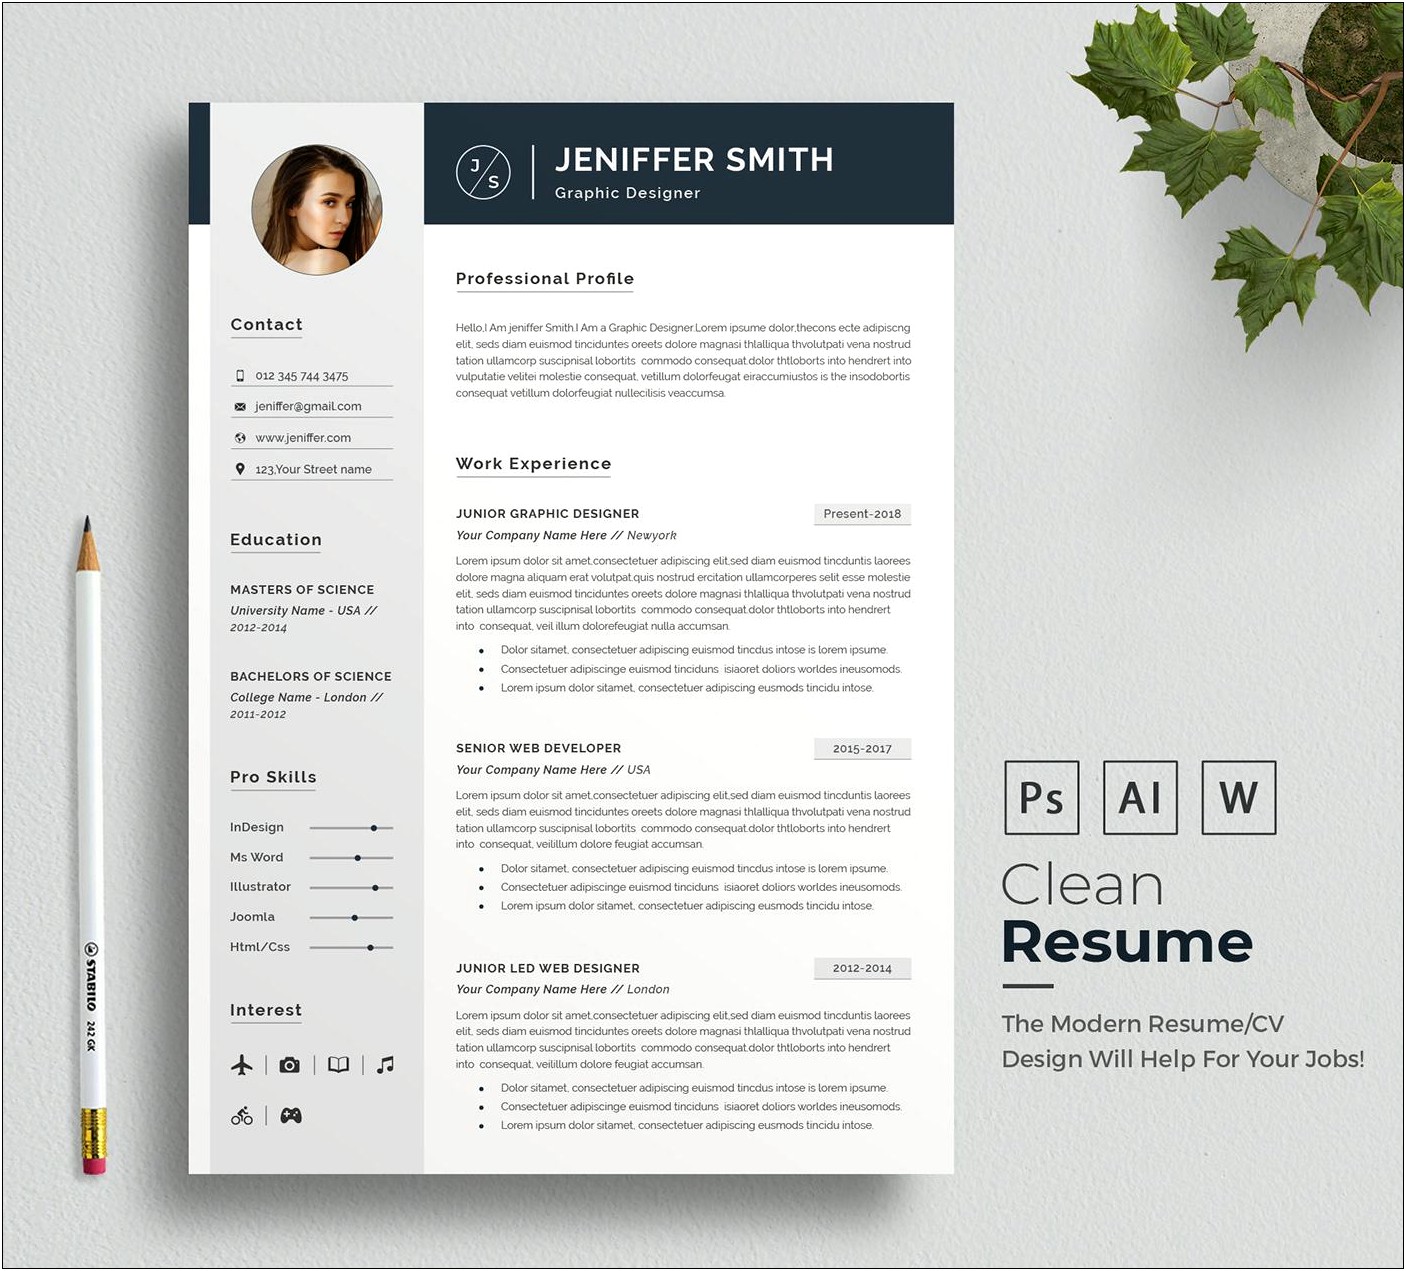 Free Image Of Resume Picture